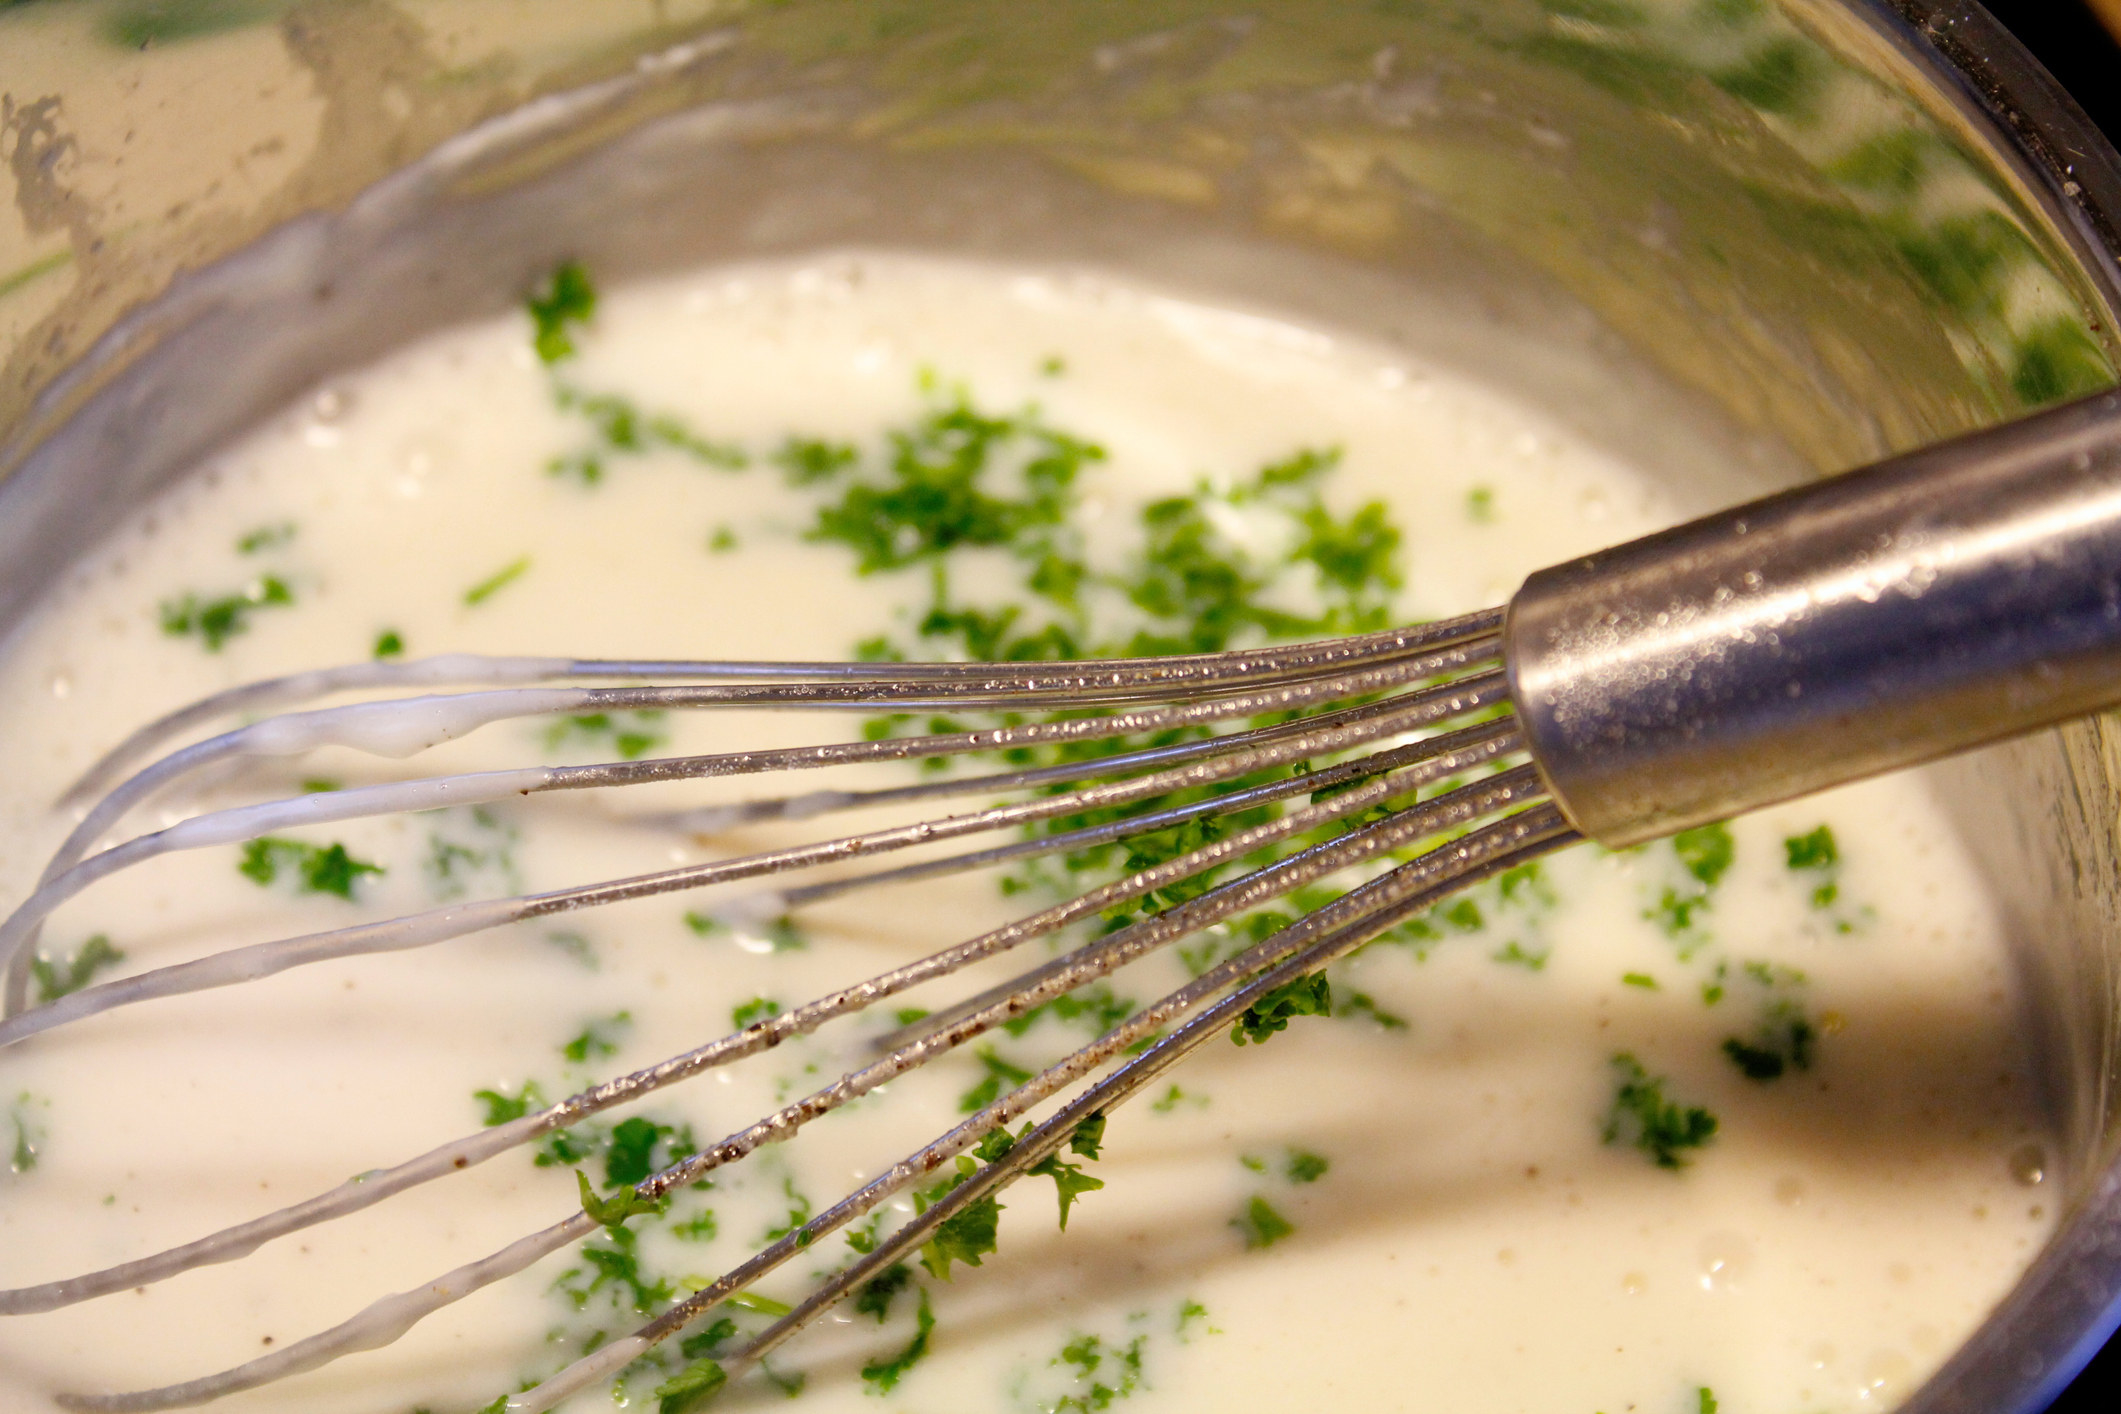 A buttery sauce with parsley.